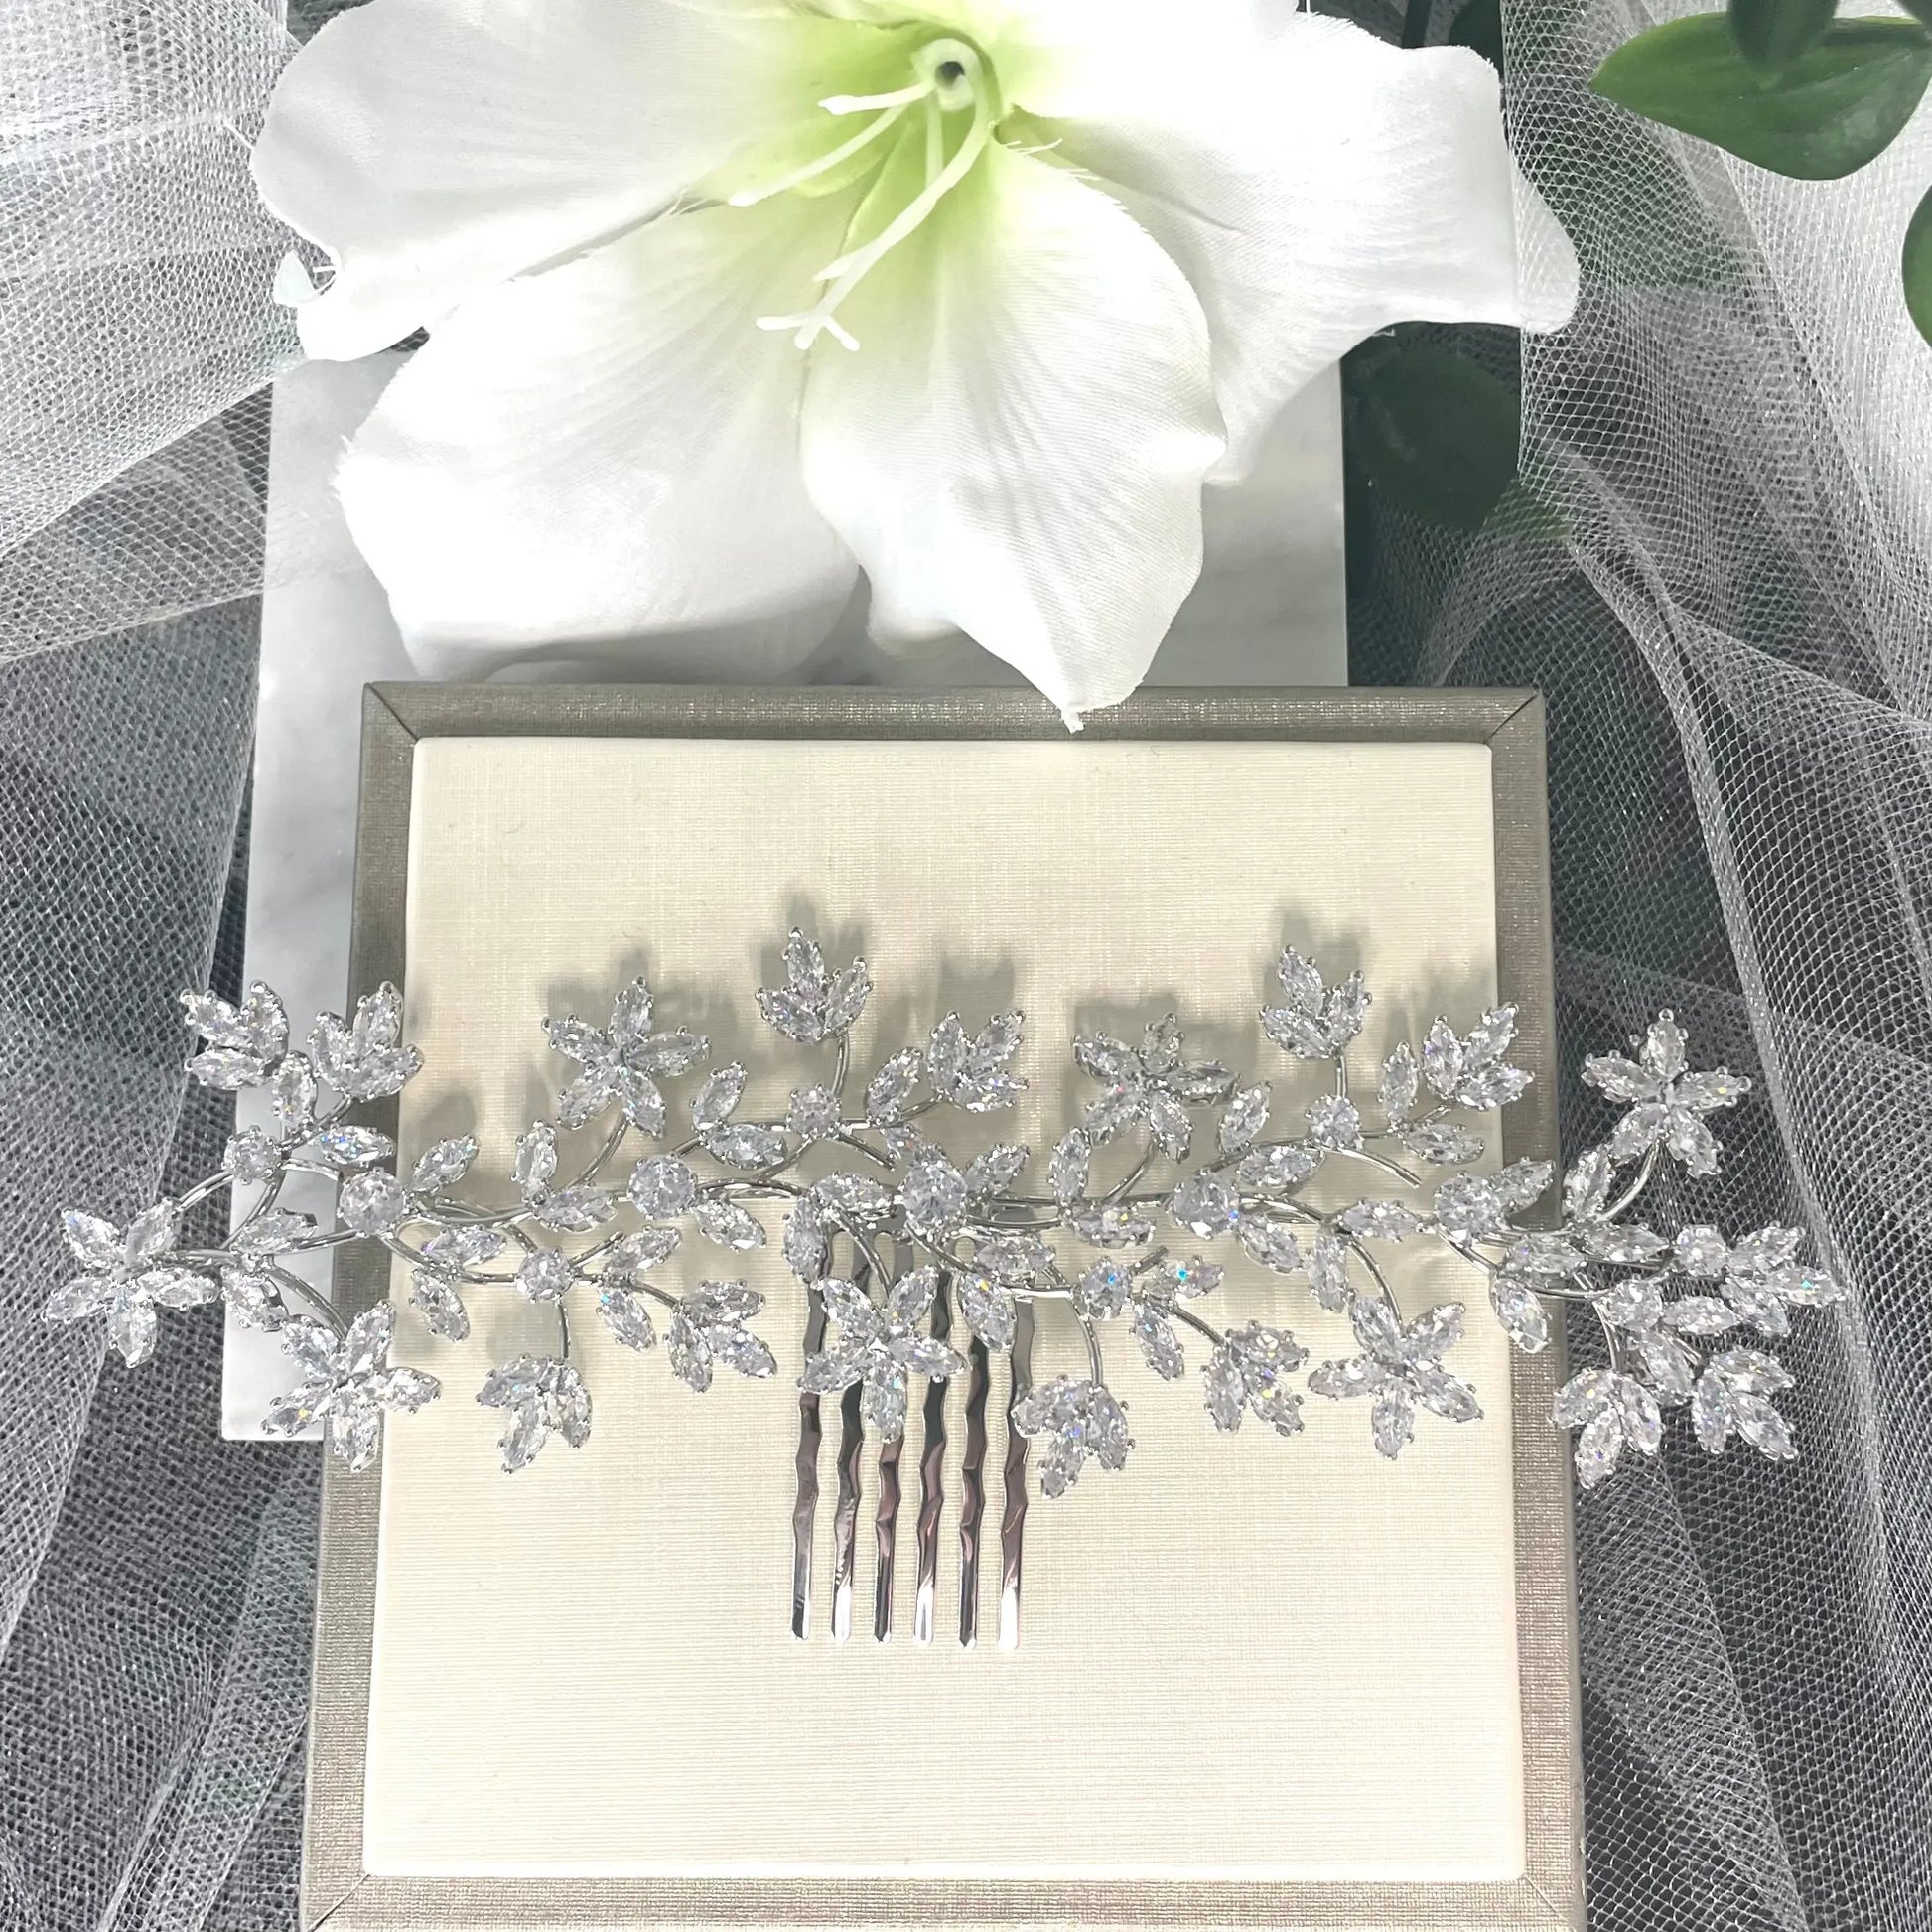 Stunning Thea Rhinestone Leaf Bridal Hair Comb in silver, featuring delicate leaf and floral vine designs adorned with sparkling crystals, perfect for enhancing bridal hairstyles.